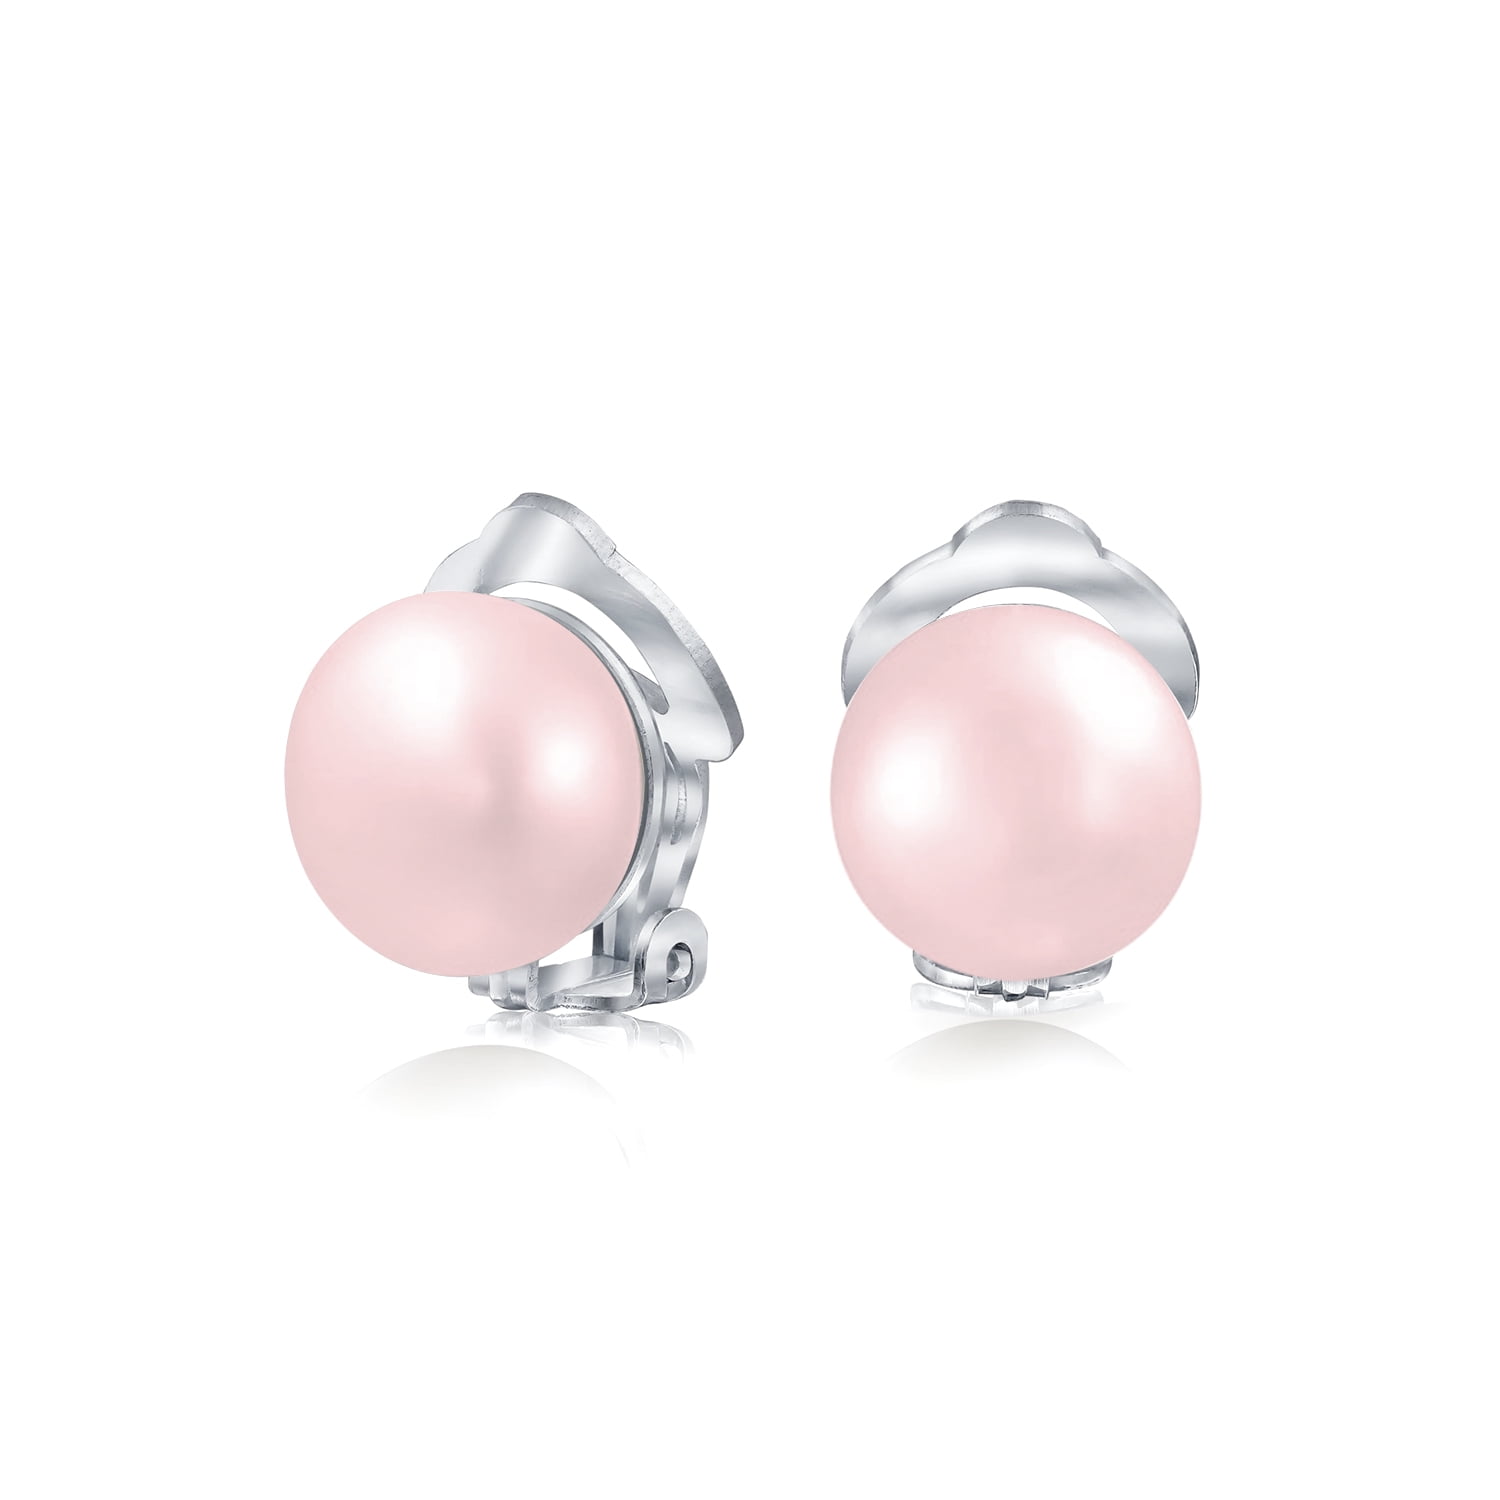 Pale Pink Freshwater Cultured Pearl Clip On Ball Stud Earrings for Women  925 Sterling Silver Non Pierced Ear